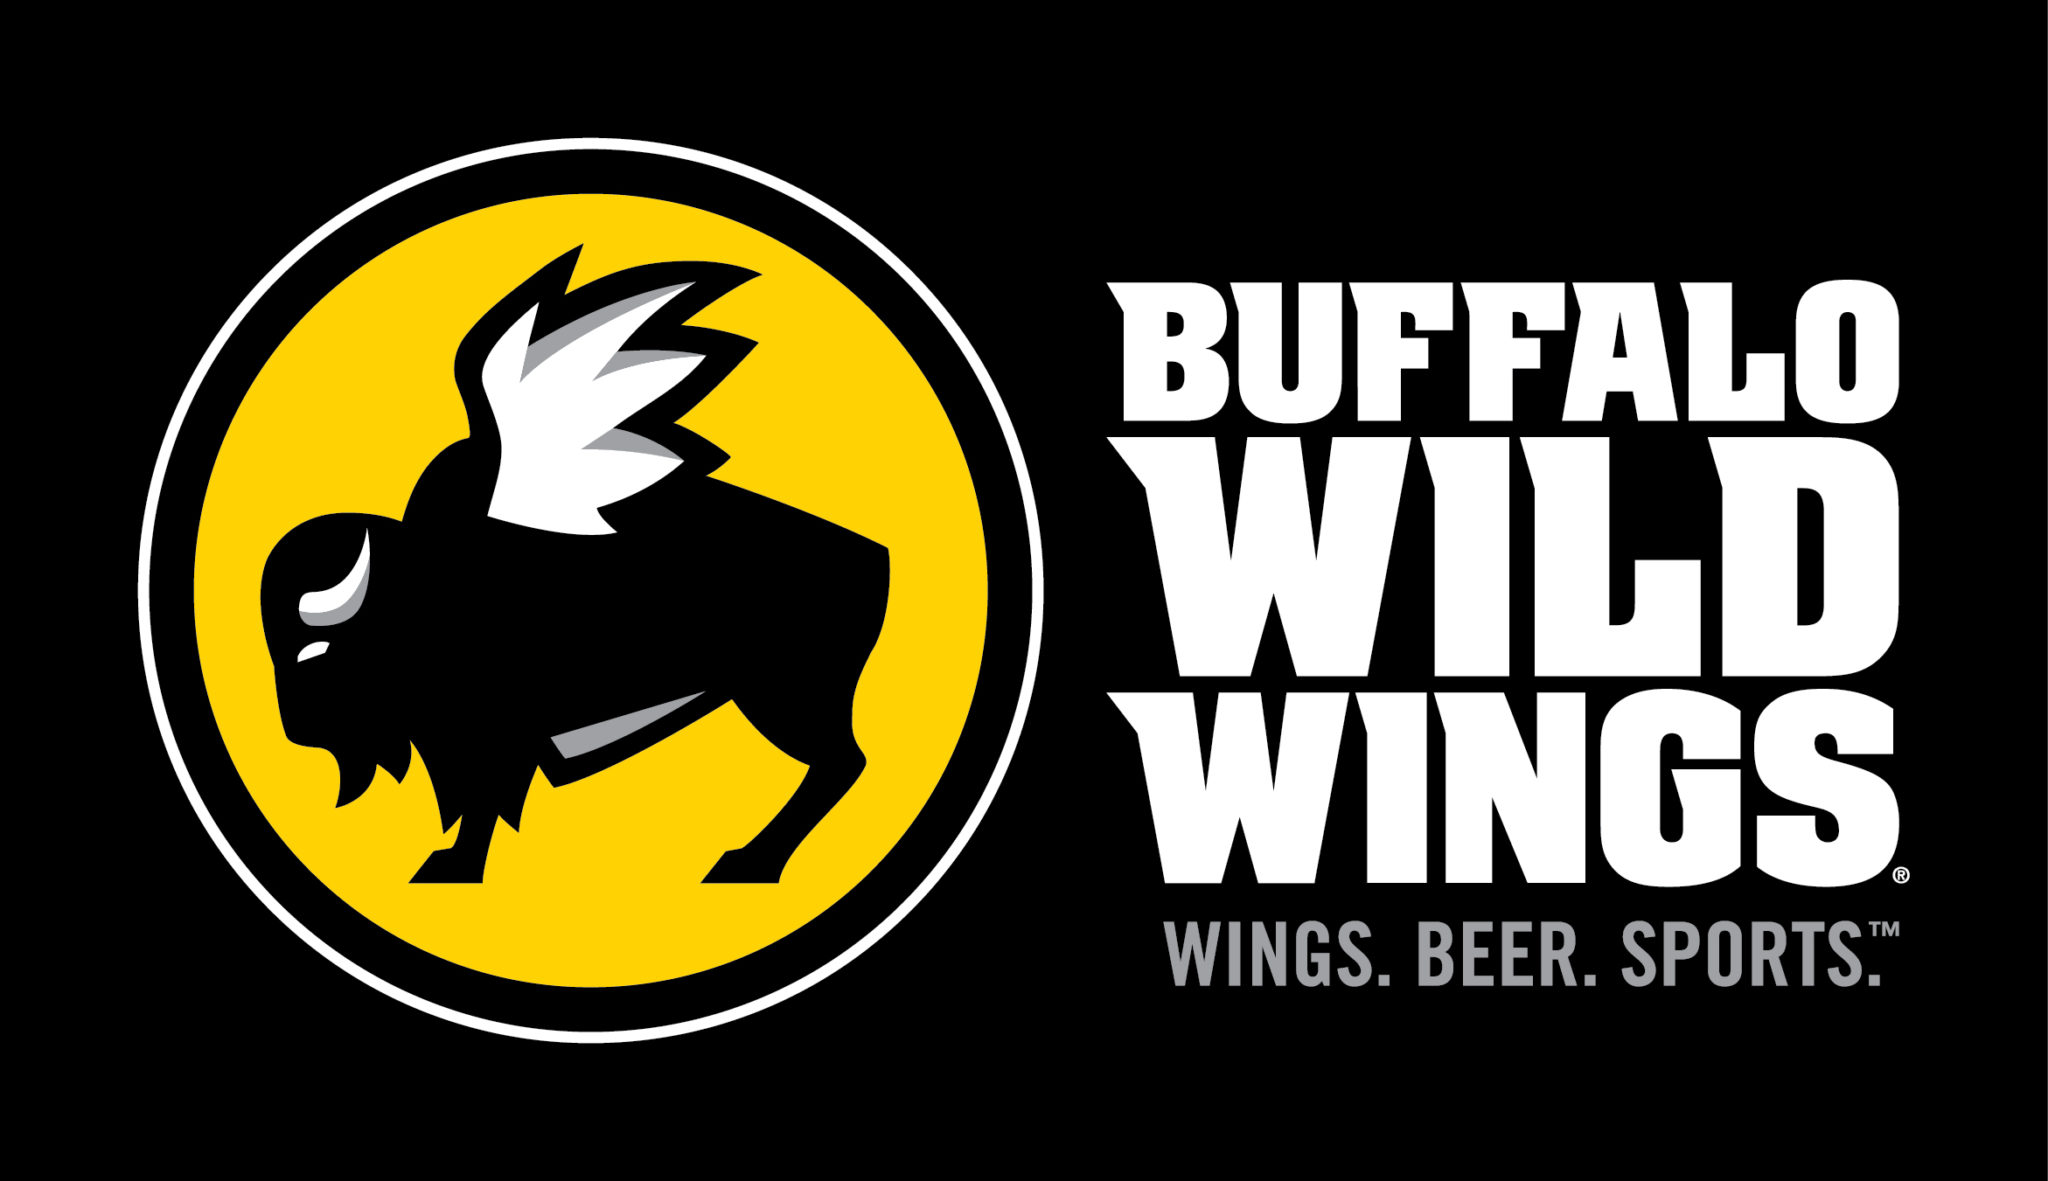 Buffalo Wild Wings Apologized For 'Awful' Tweets From Their Twitter!